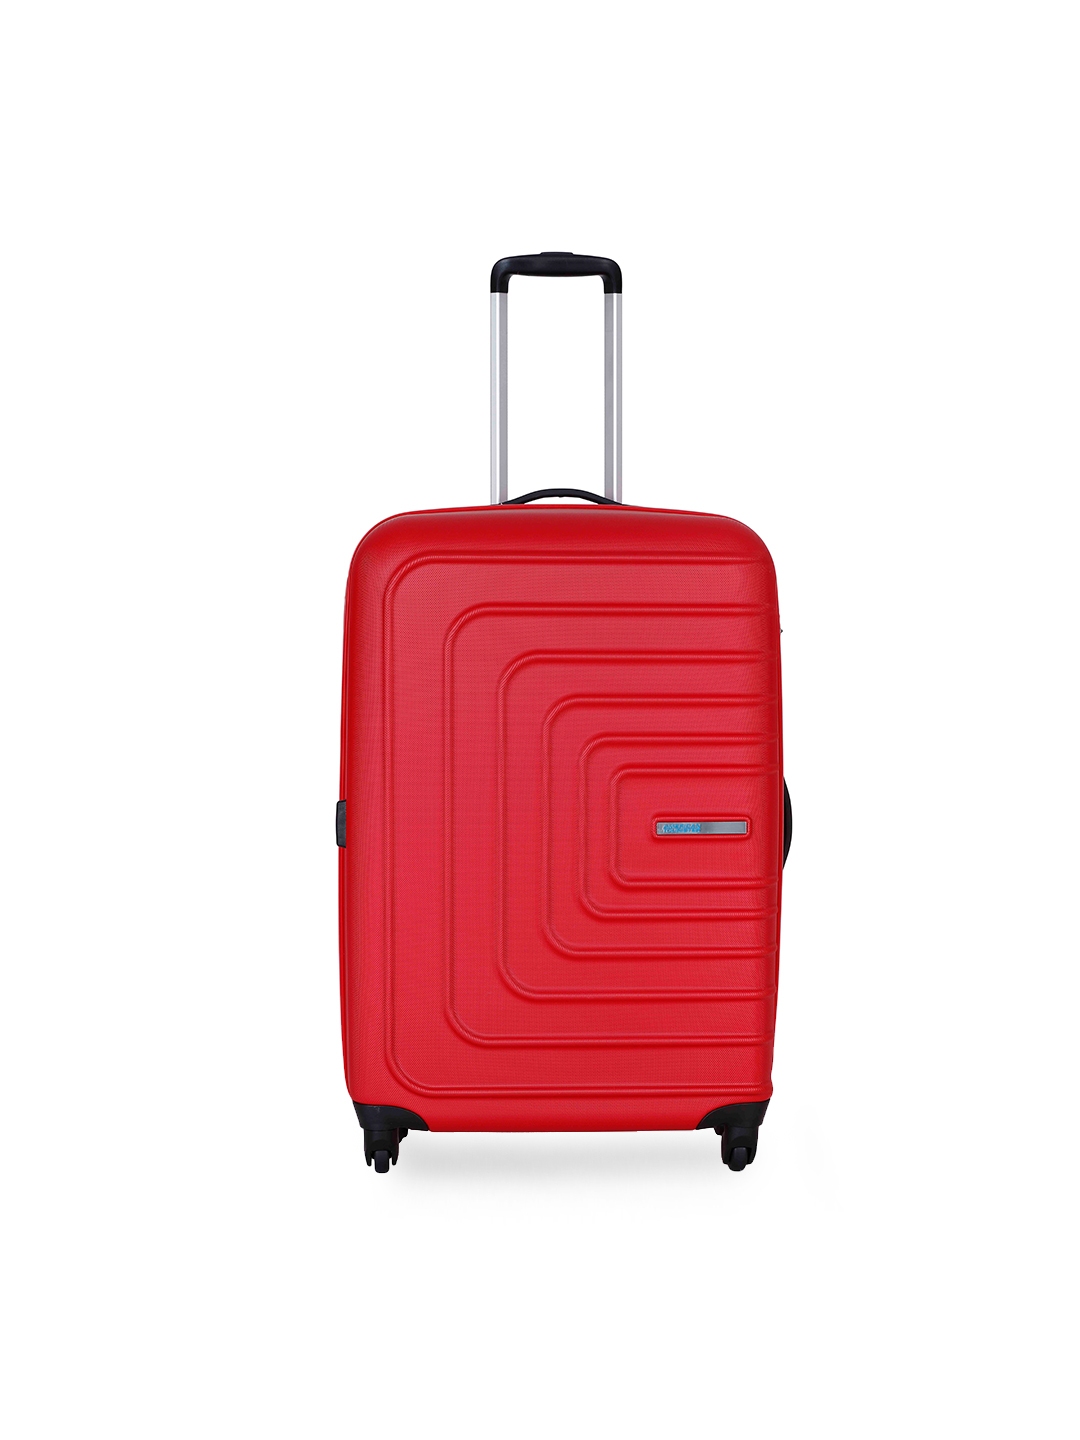 Polycarbonate American Tourister Luggage Trolley Bag, Size: 30x77x20 Cm